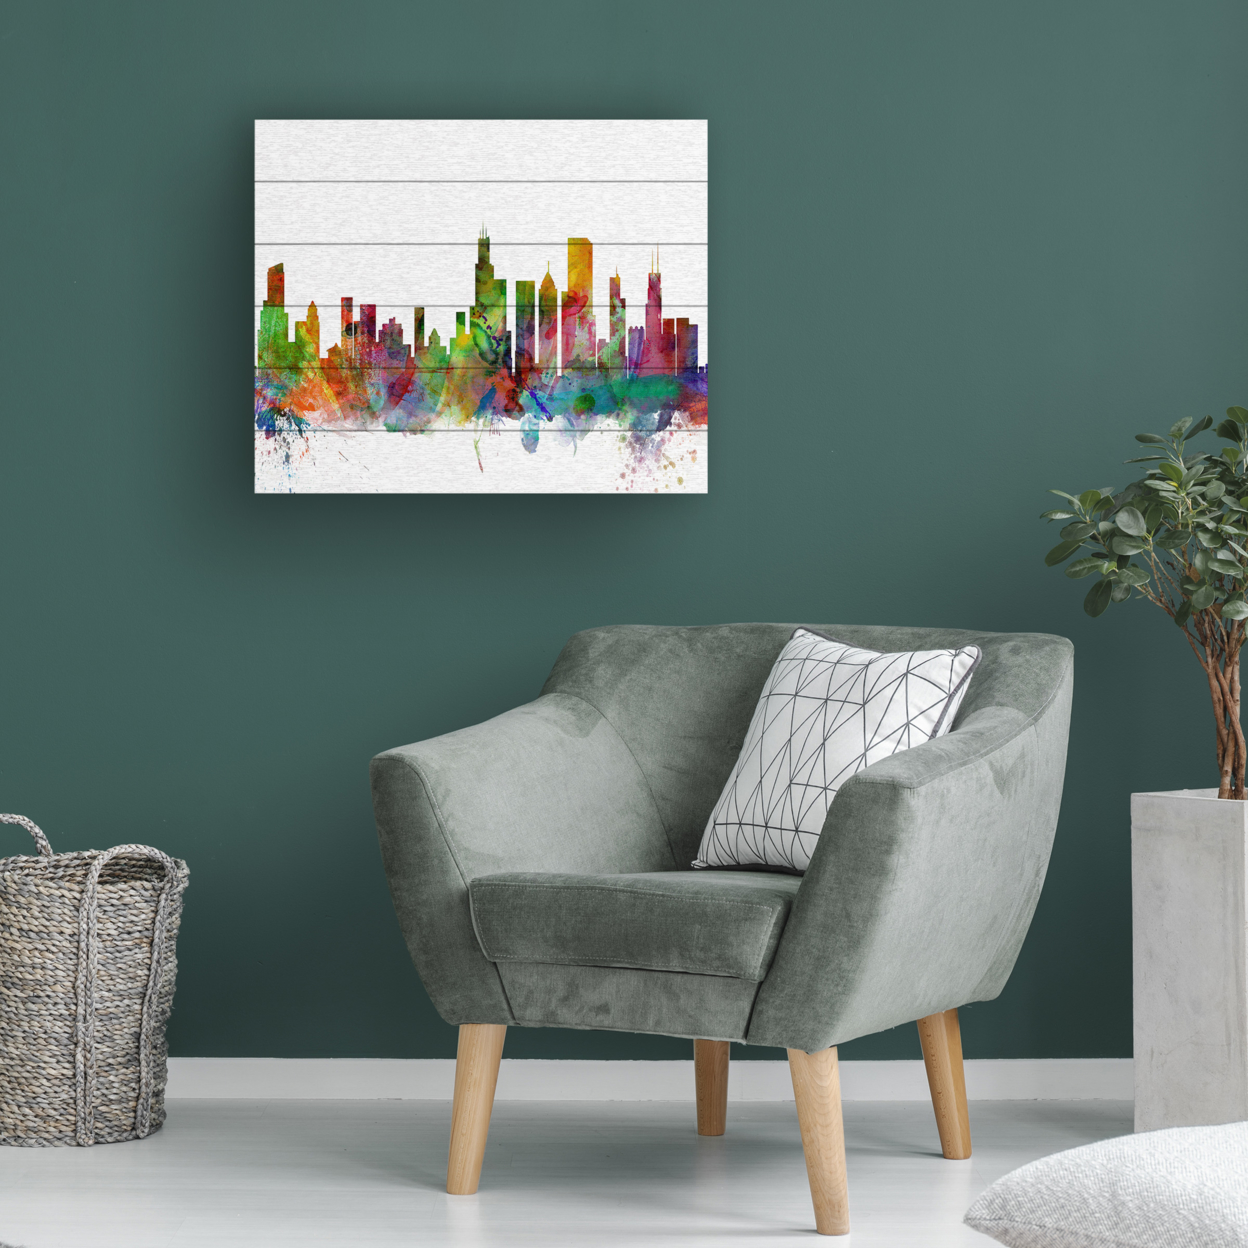 Wooden Slat Art 18 X 22 Inches Titled Chicago Illinois Skyline Ready To Hang Home Decor Picture